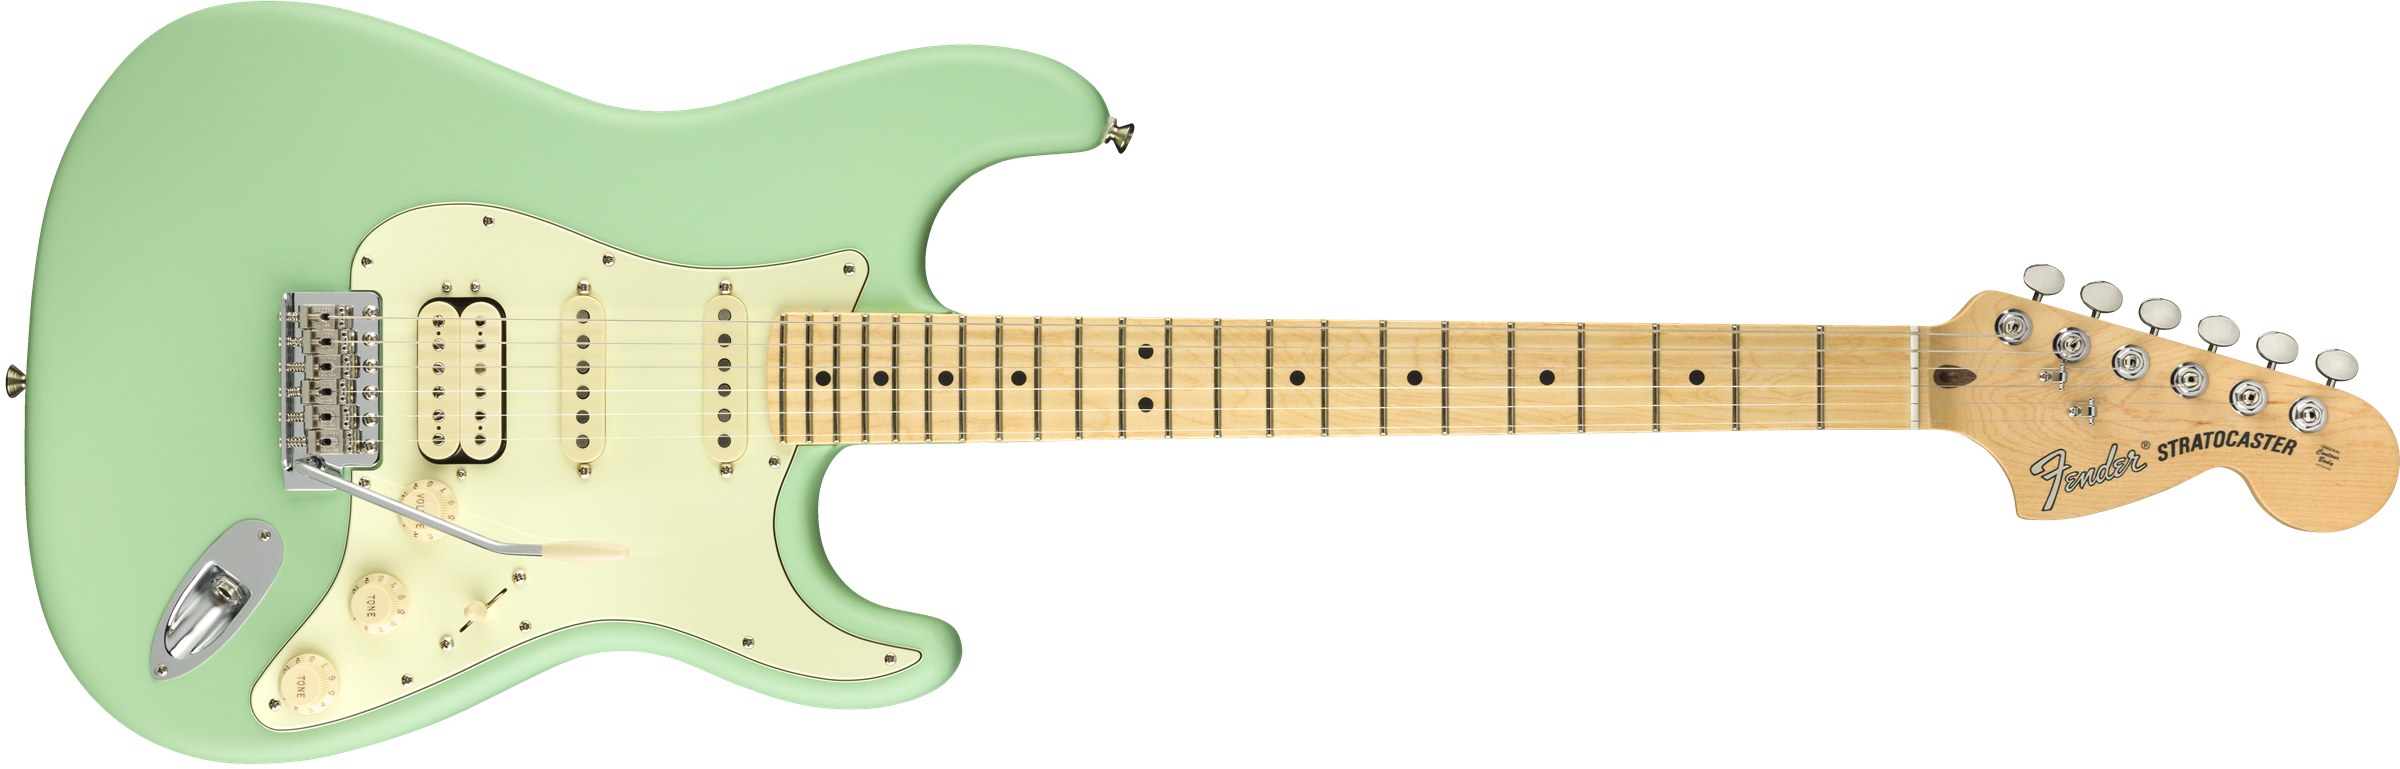 Guitarra American Performe Stratocaster Hss Mn Surf - Fender Stratocaster American Performer Hss (2400x769), Png Download